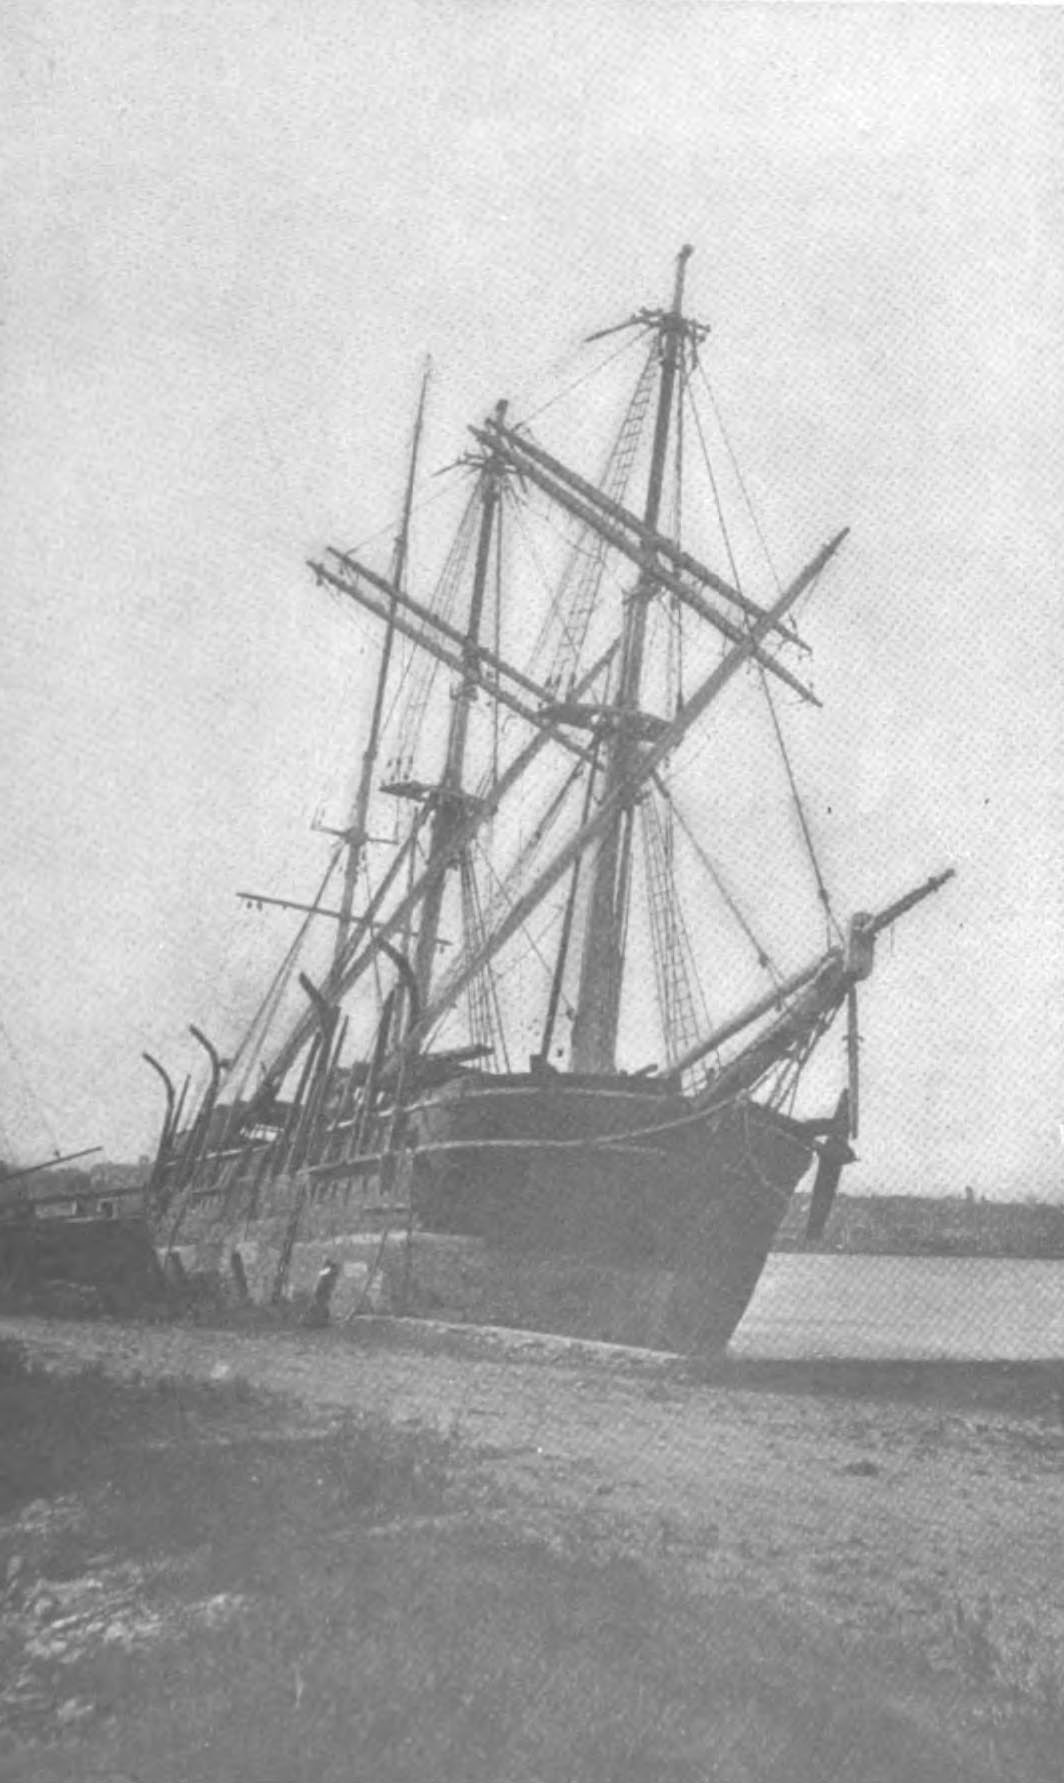 Wreck of whaling ship from Massachusetts which sank nearly 190 years ago  discovered in Gulf of Mexico, may offer clues about the history of its  diverse crew 